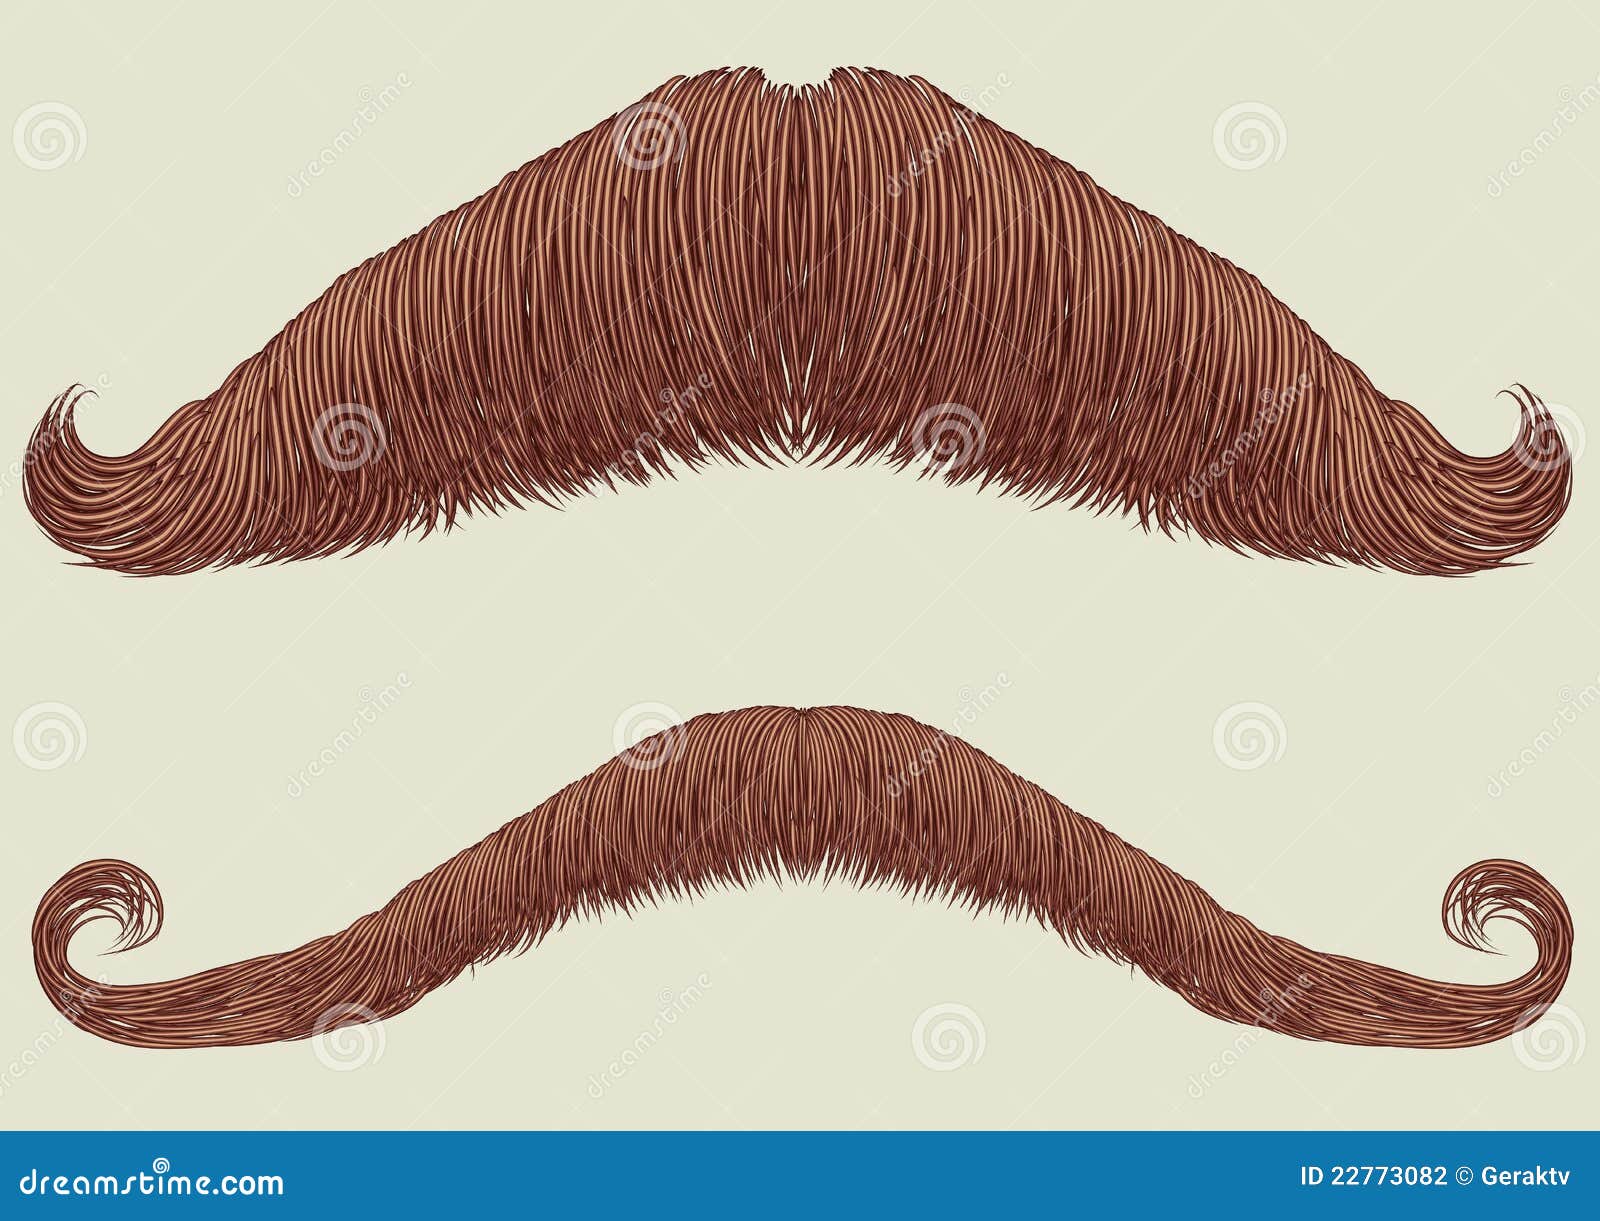 mustaches for man.